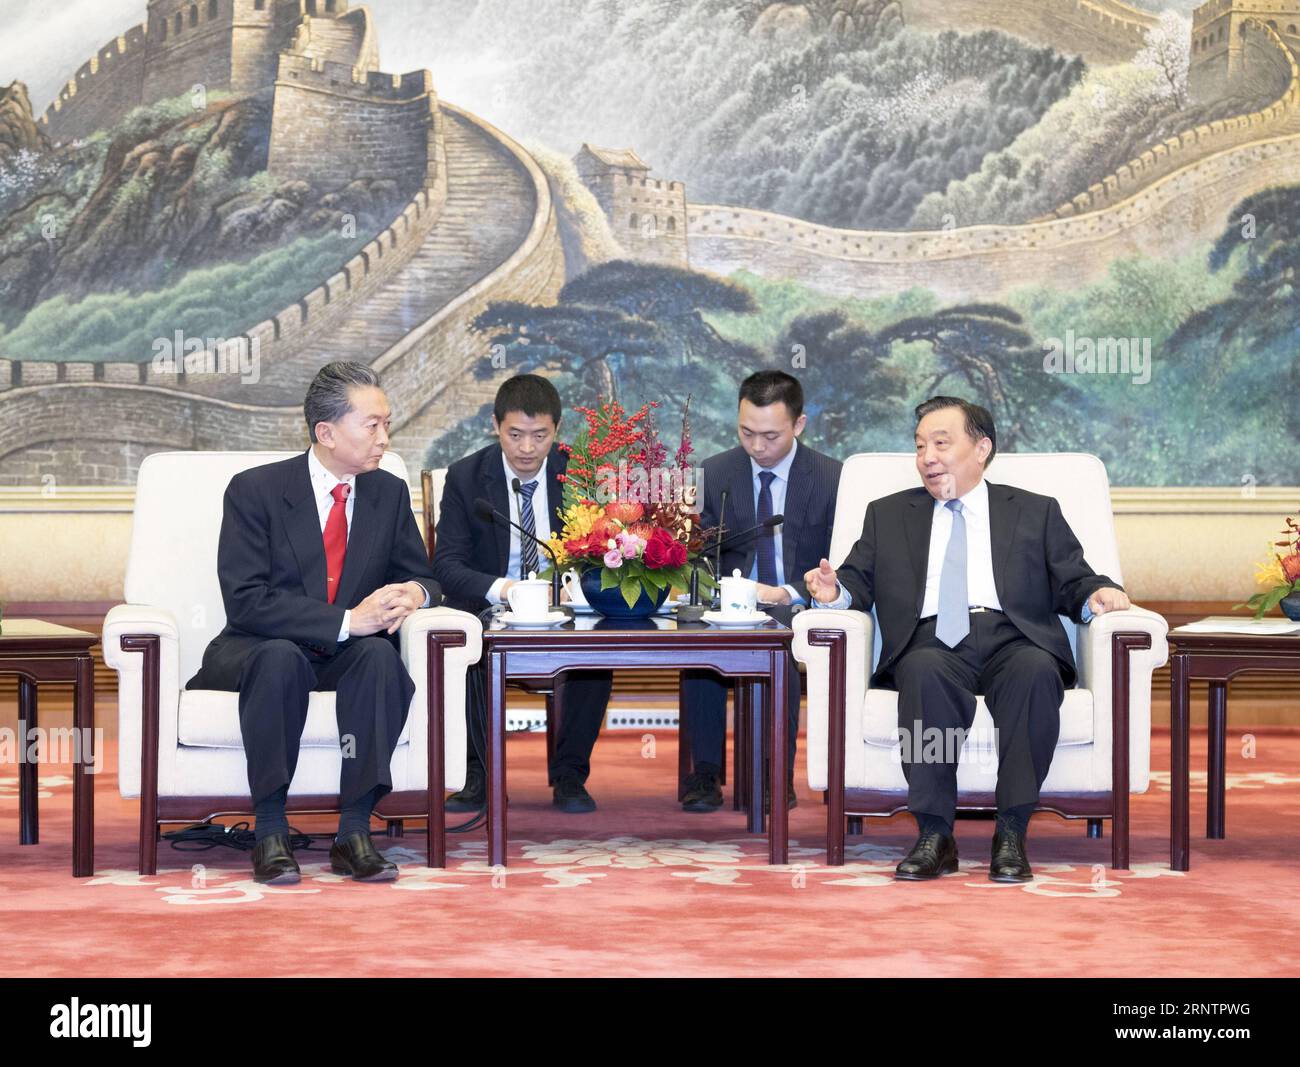 (171115) -- BEIJING, Nov. 15, 2017 -- Wang Chen (R), a member of the Political Bureau of the Communist Party of China (CPC) Central Committee and vice chairman of the Standing Committee of the National People s Congress (NPC), meets with former Japanese Prime Minister Yukio Hatoyama in Beijing, capital of China, Nov. 15, 2017. Hatoyama is in China leading a delegation from the Japanese Yuai Association. ) (dhf) CHINA-BEIJING-WANG CHEN-JAPAN-MEETING (CN) DingxHaitao PUBLICATIONxNOTxINxCHN Stock Photo